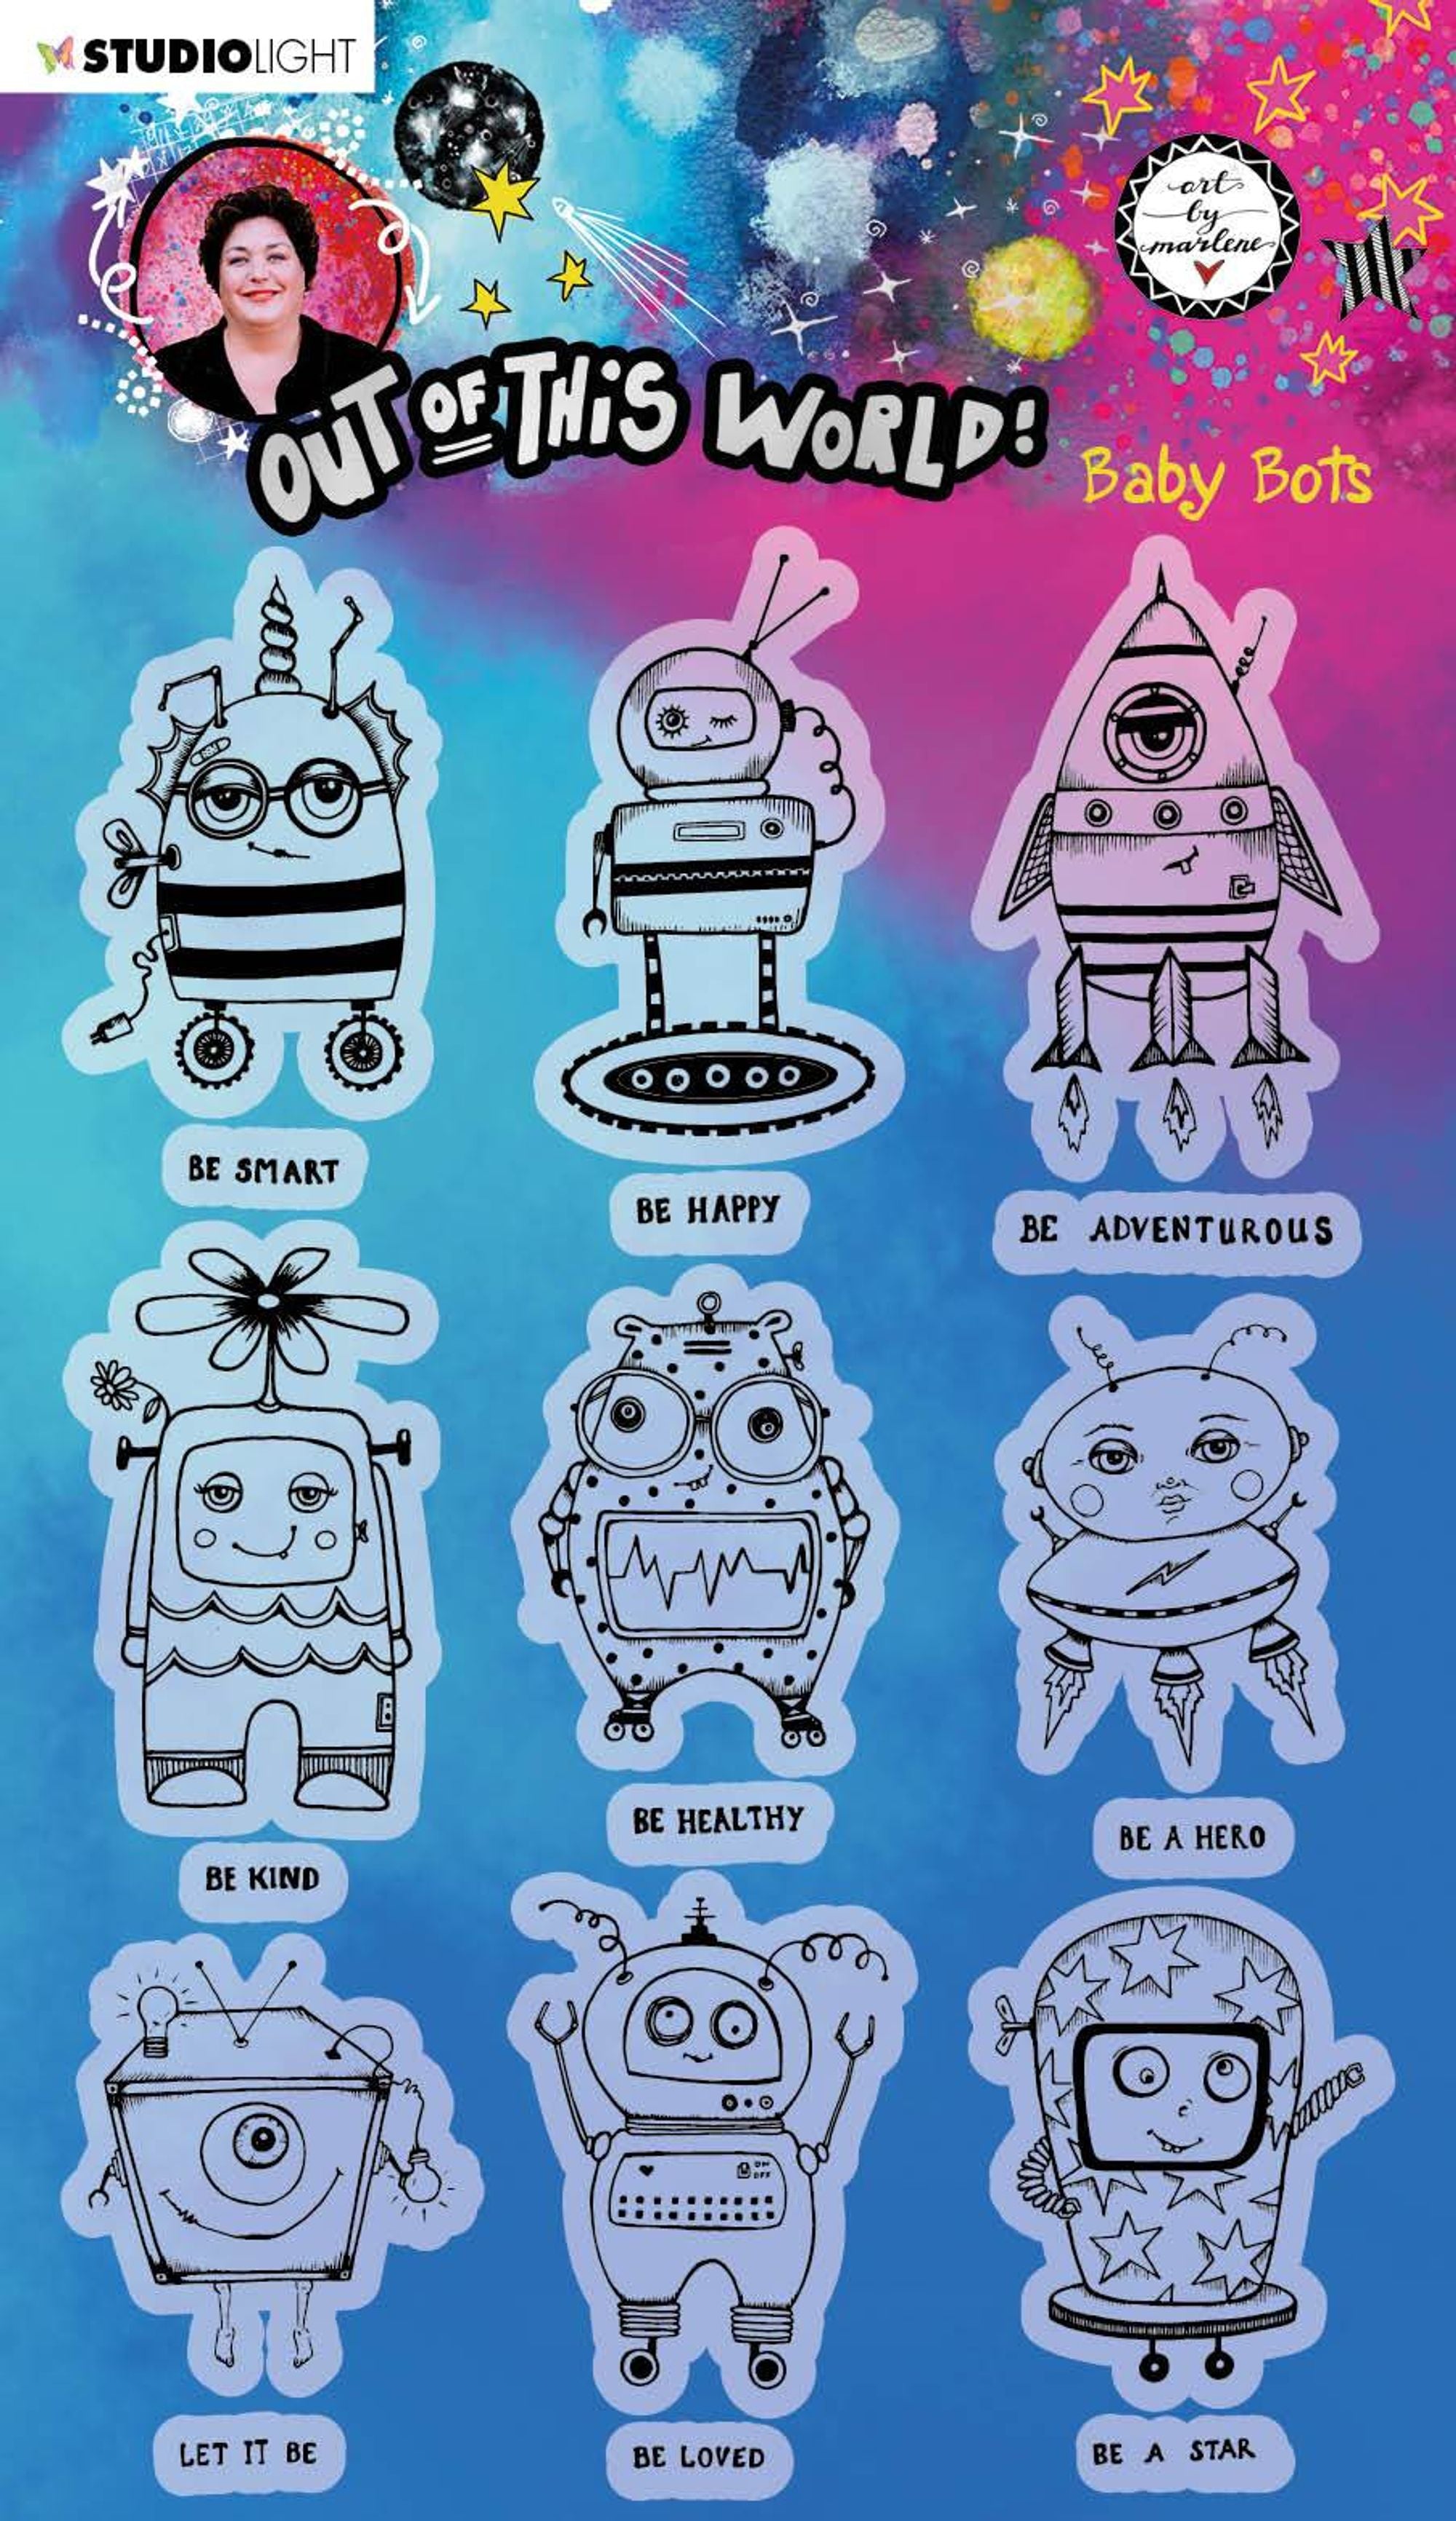 ABM Clear Stamp Baby Bots Out Of This World 148x210mm nr.74